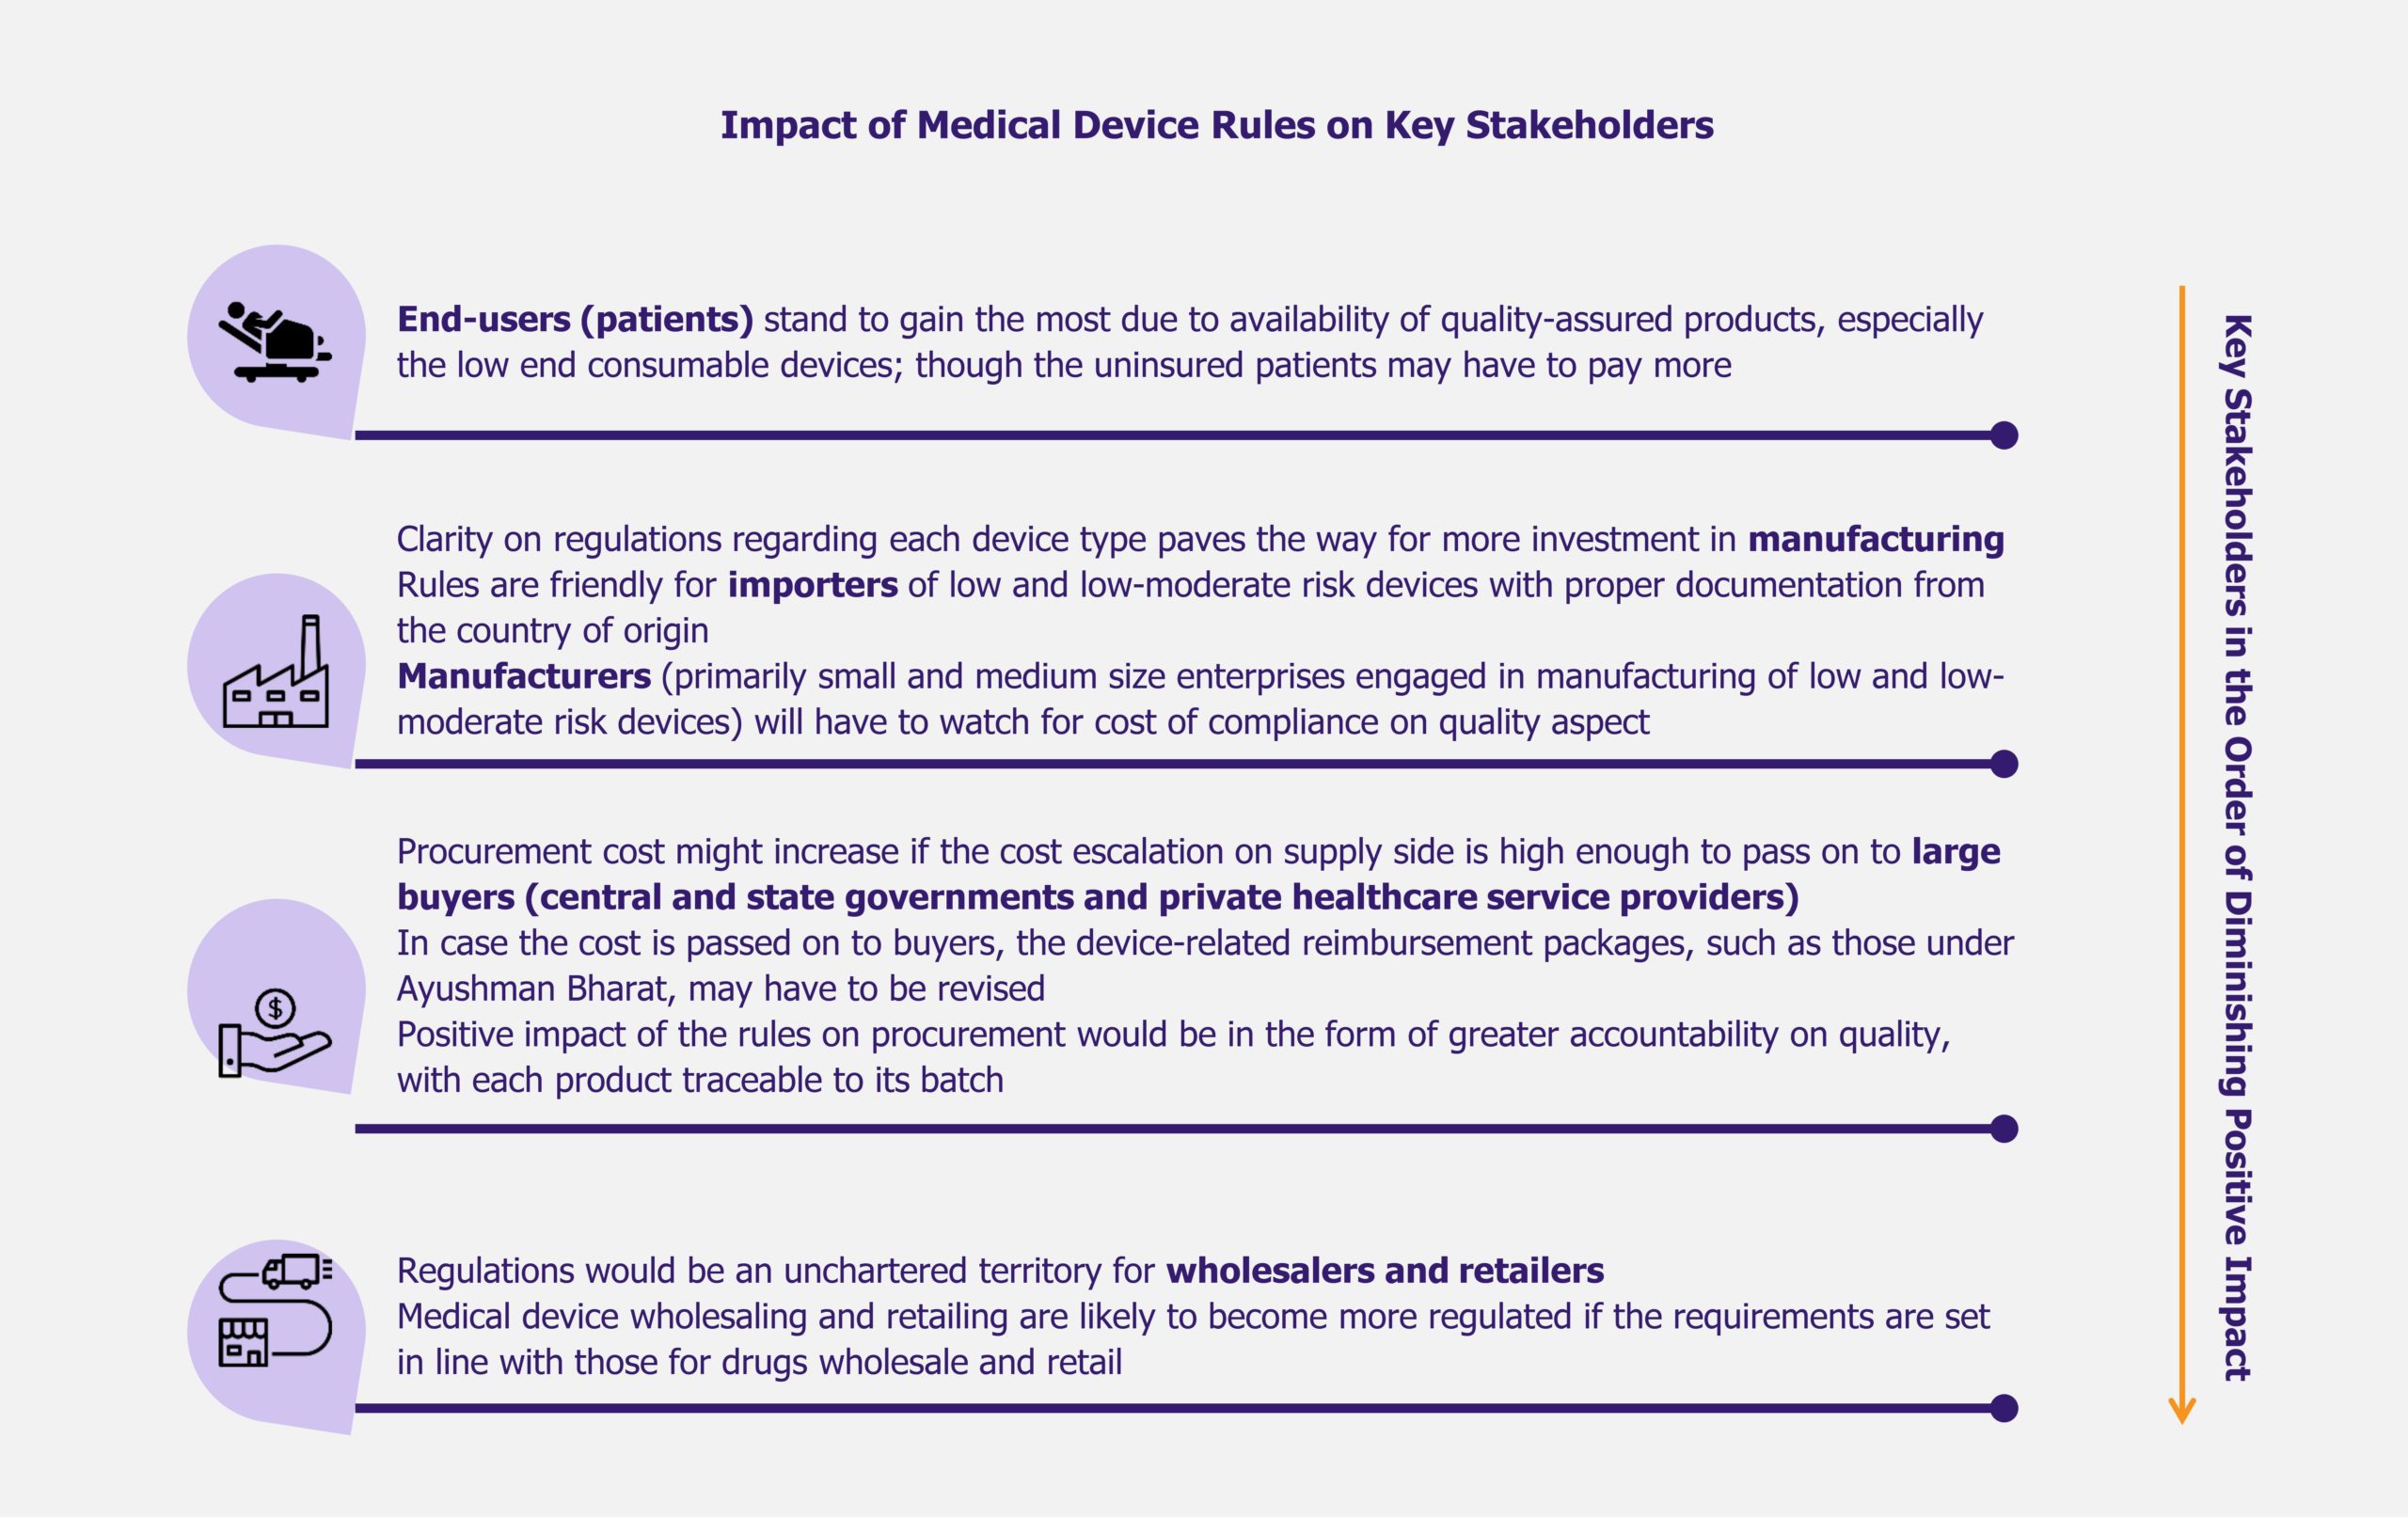 Indian Medical Device Rules - A Step Towards Better Future by EOS Intelligence